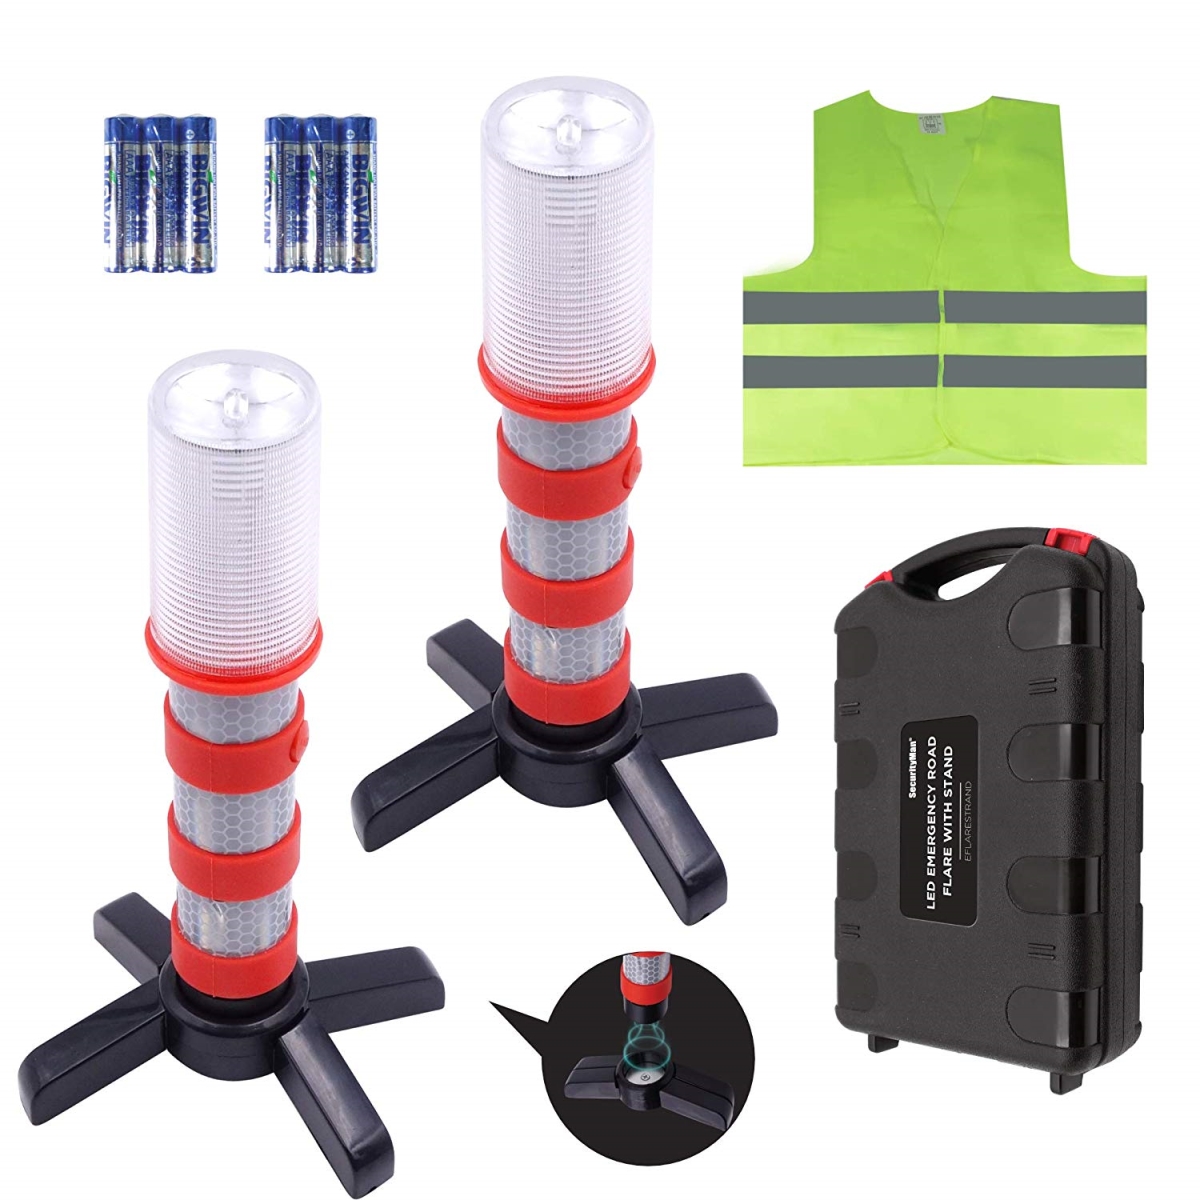 Eflarestand 2-in-1 Led Emergency Roadside Flare With Stand